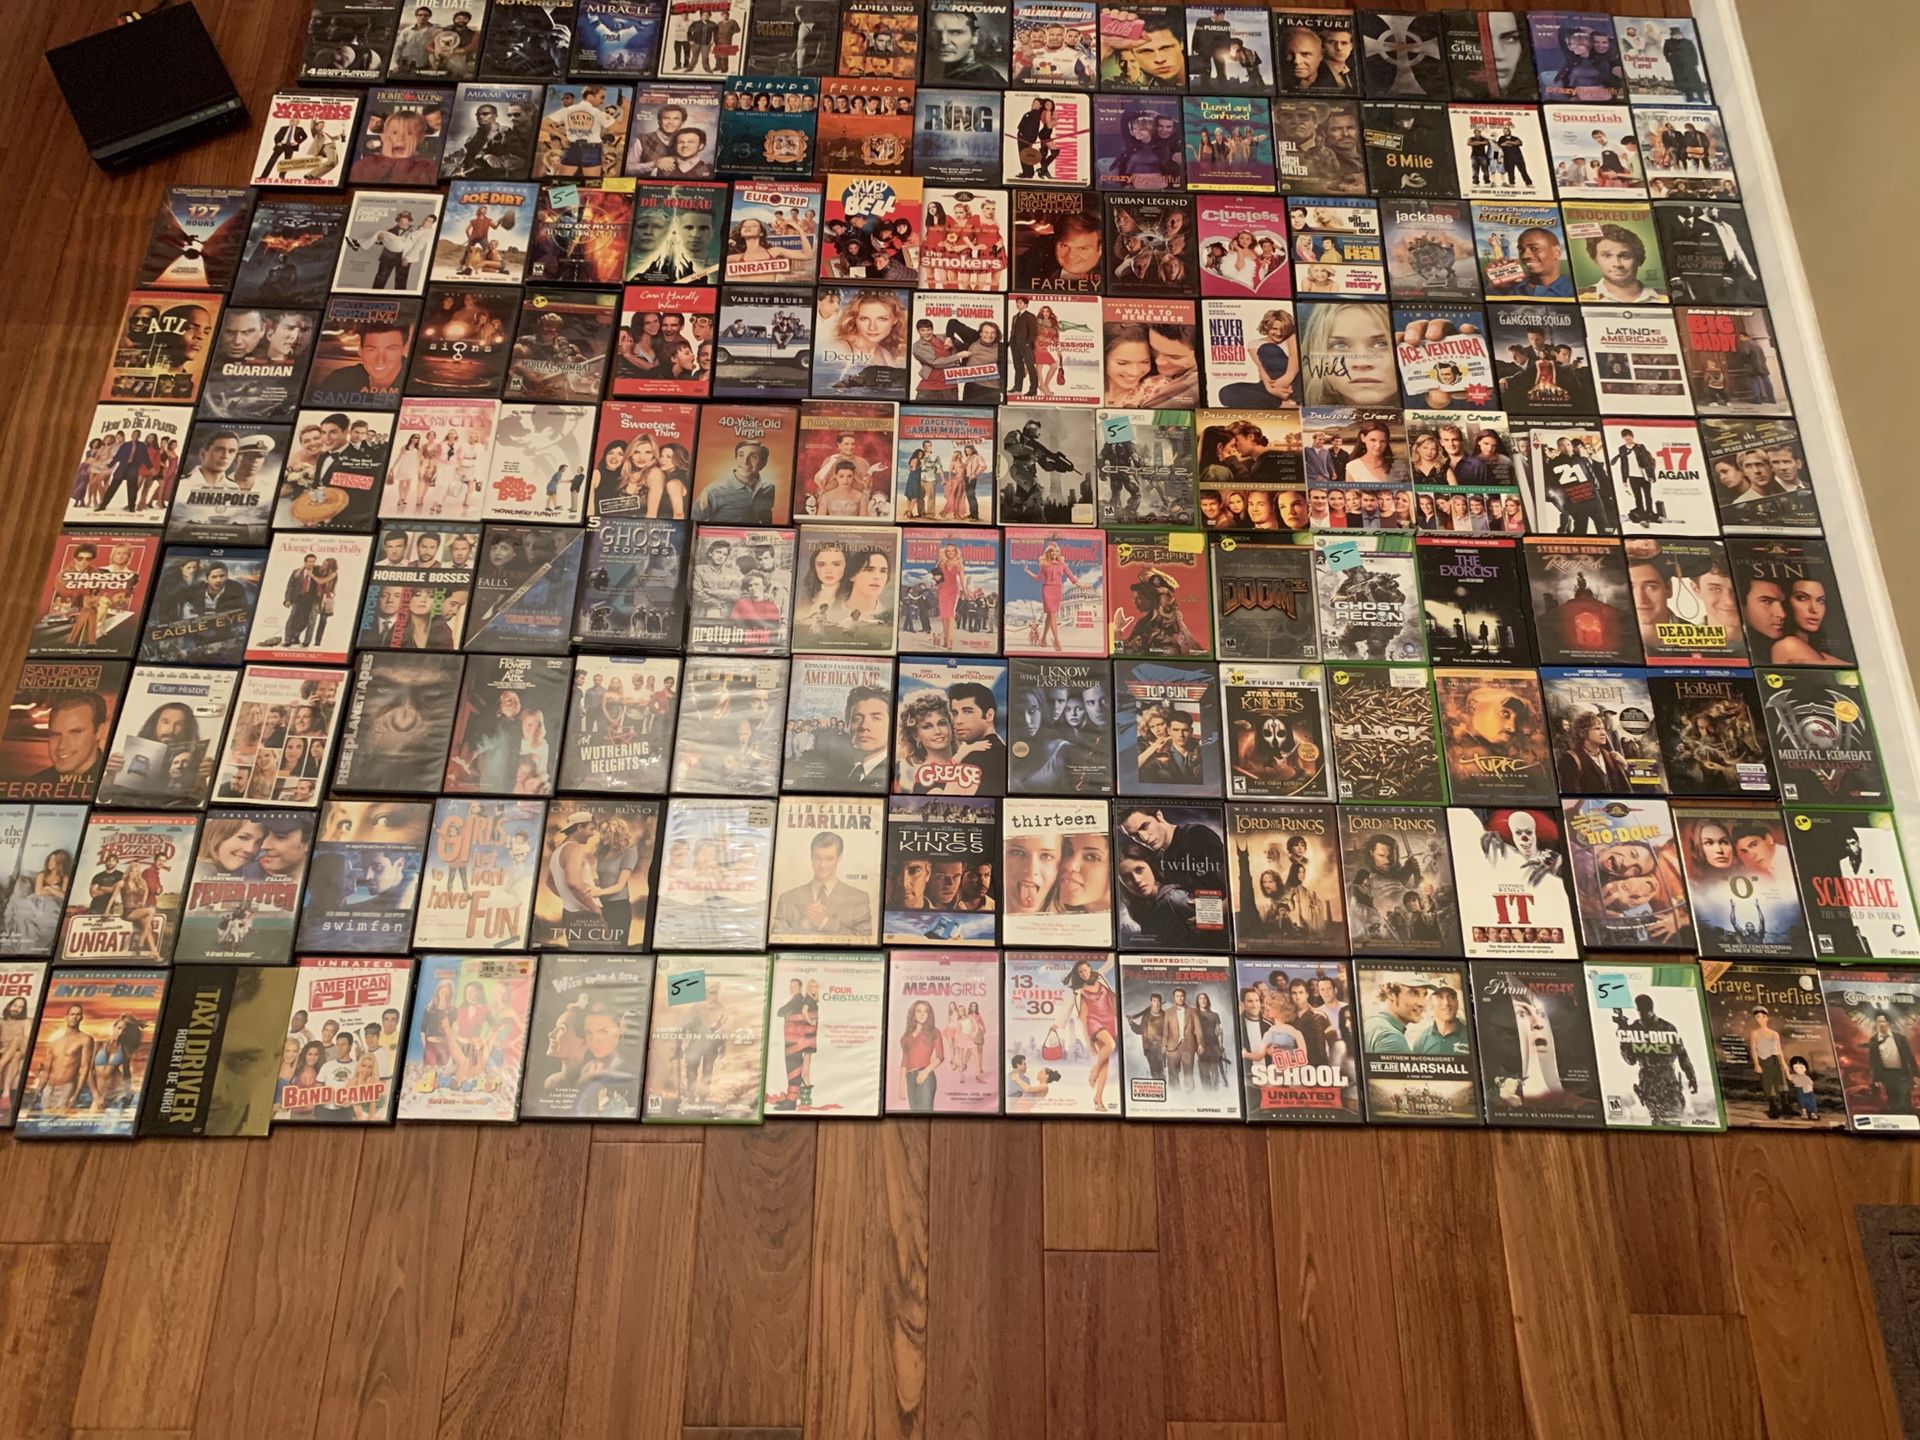 Great condition DVDs